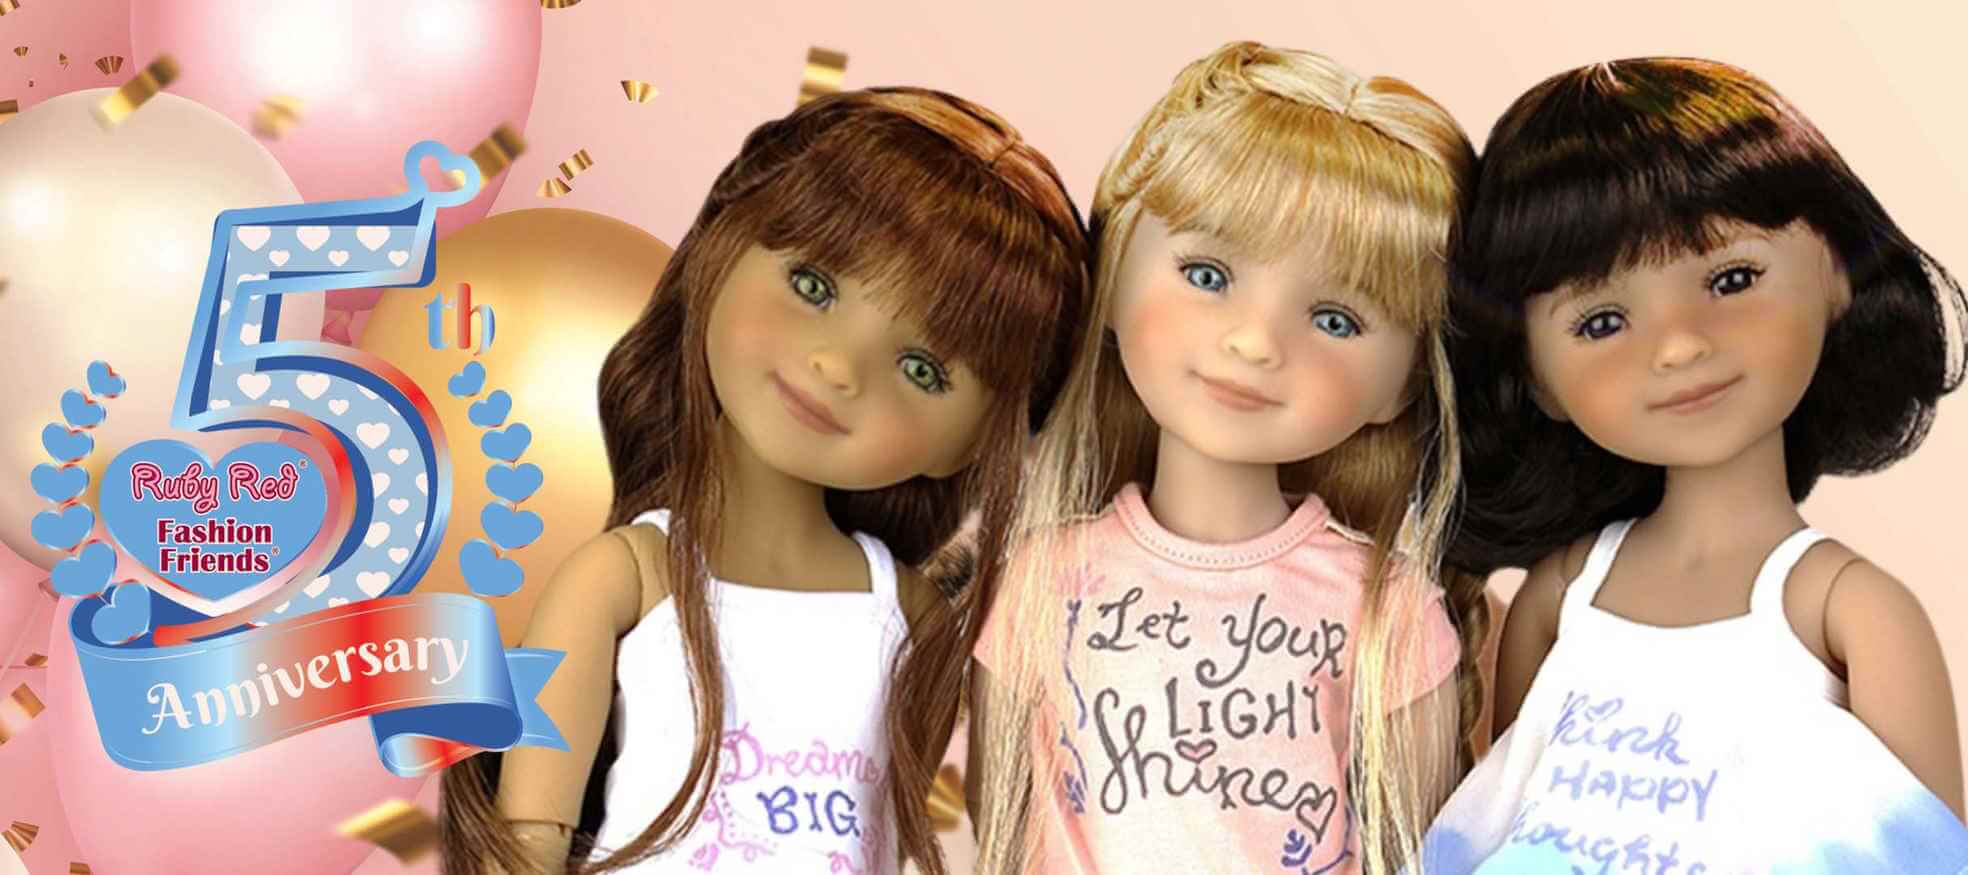 Premium Collectible Dolls from Ruby Red Fashion Friends